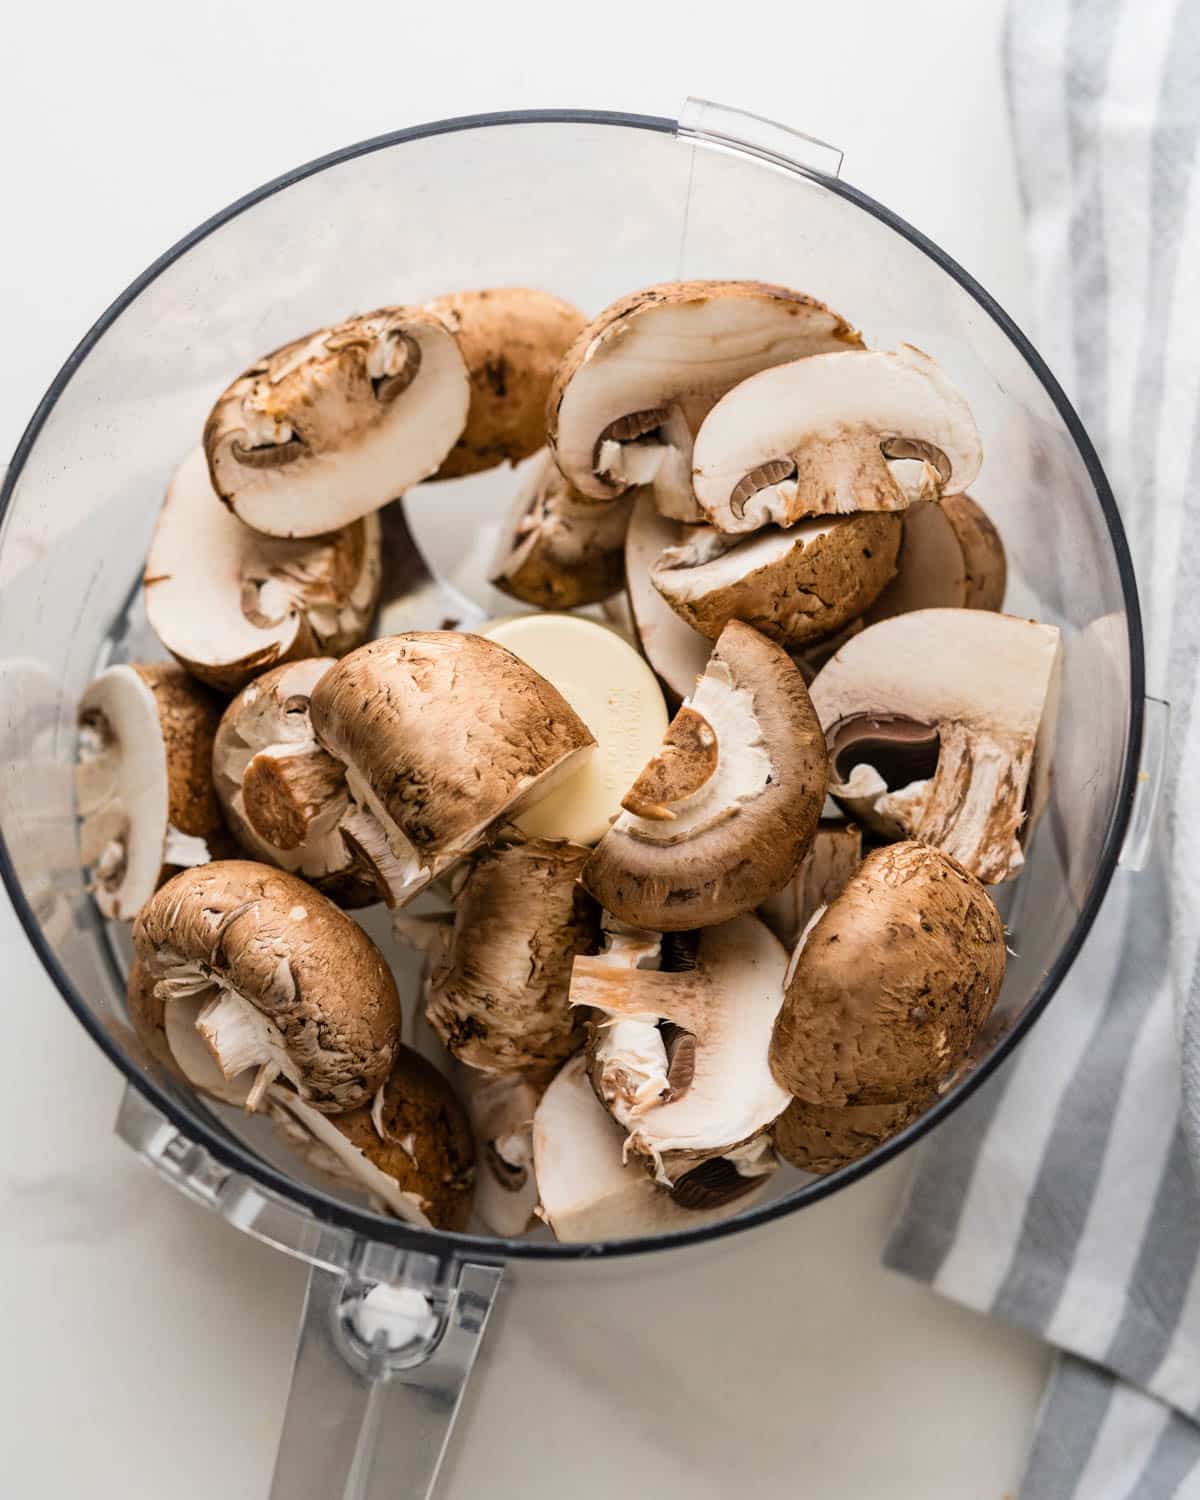 Mushrooms in a food proces